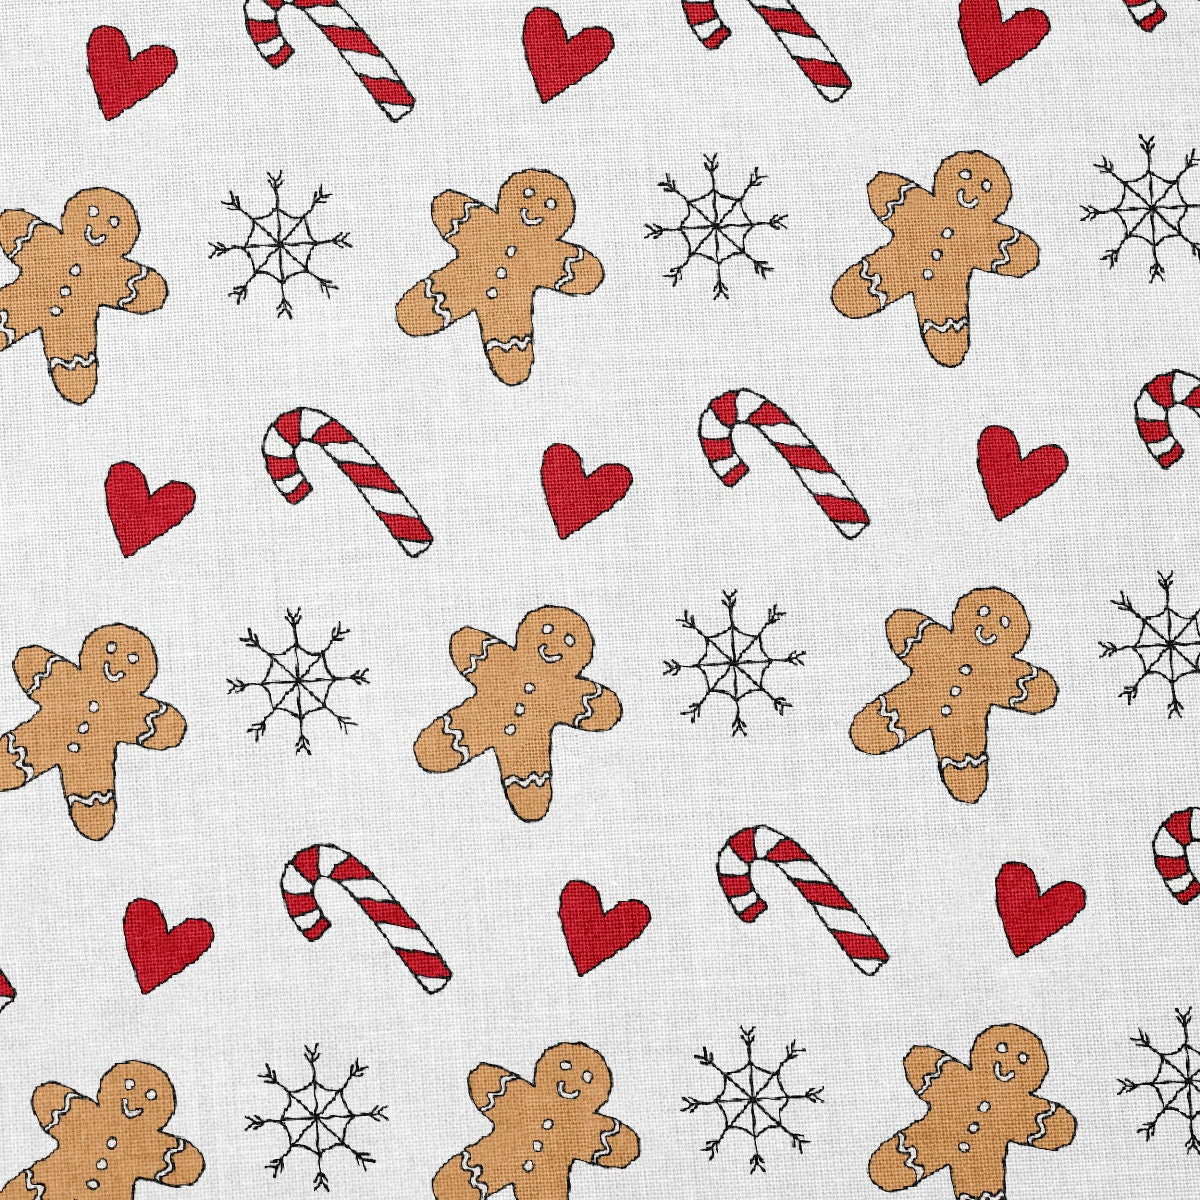 100% Cotton Fabric By the Yard Printed in USA Cotton Sateen -  Cotton  CTN2163 Christmas